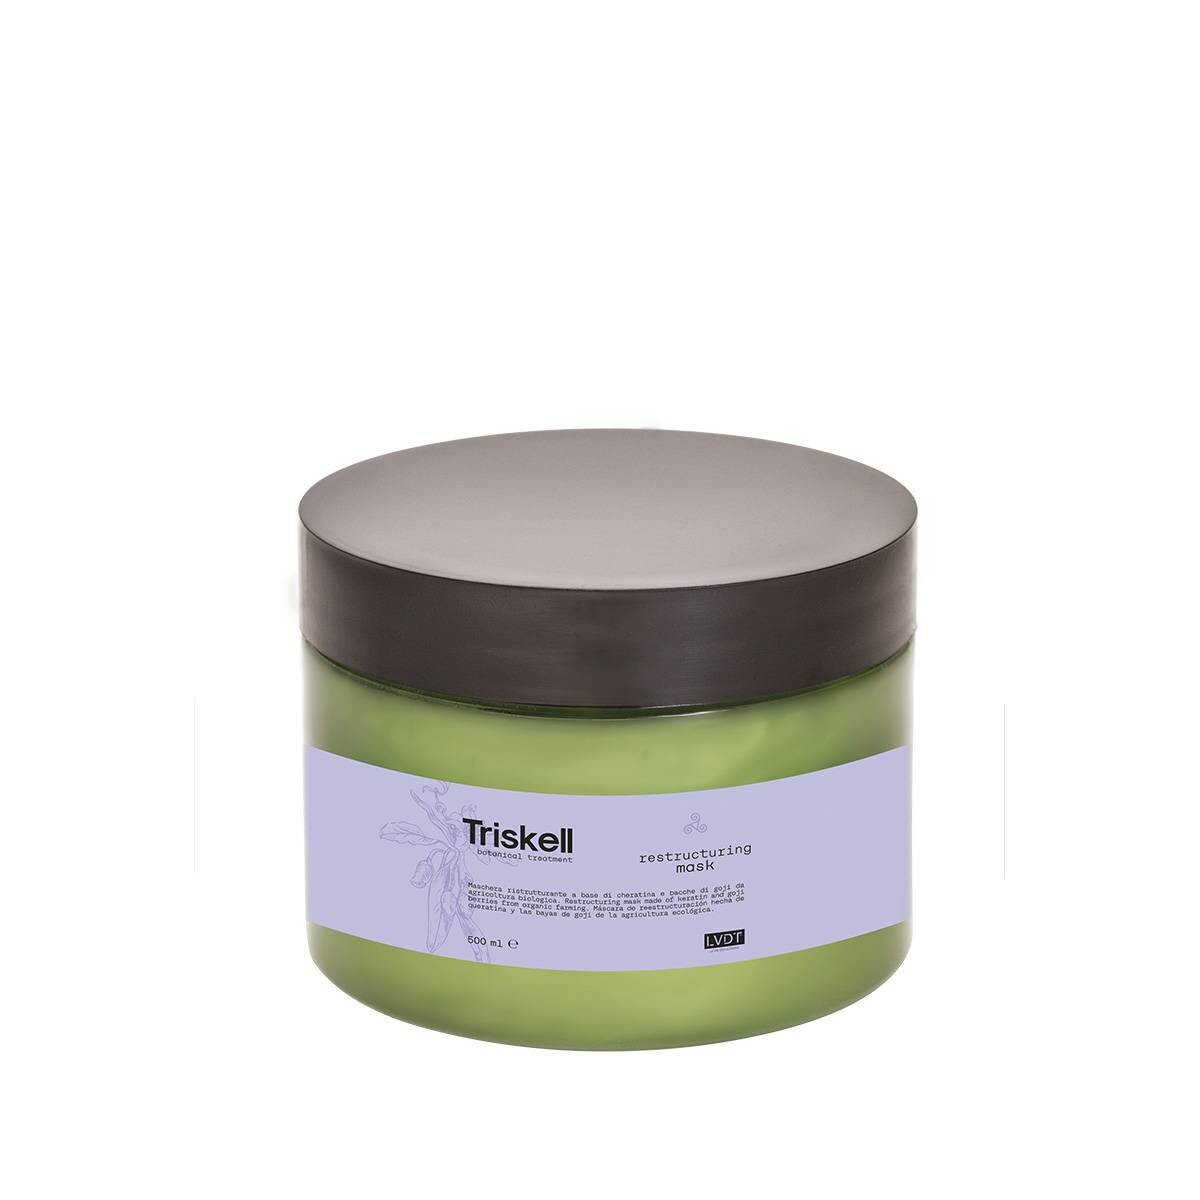 TRISKELL RESTRUCTURING MASK 250ml